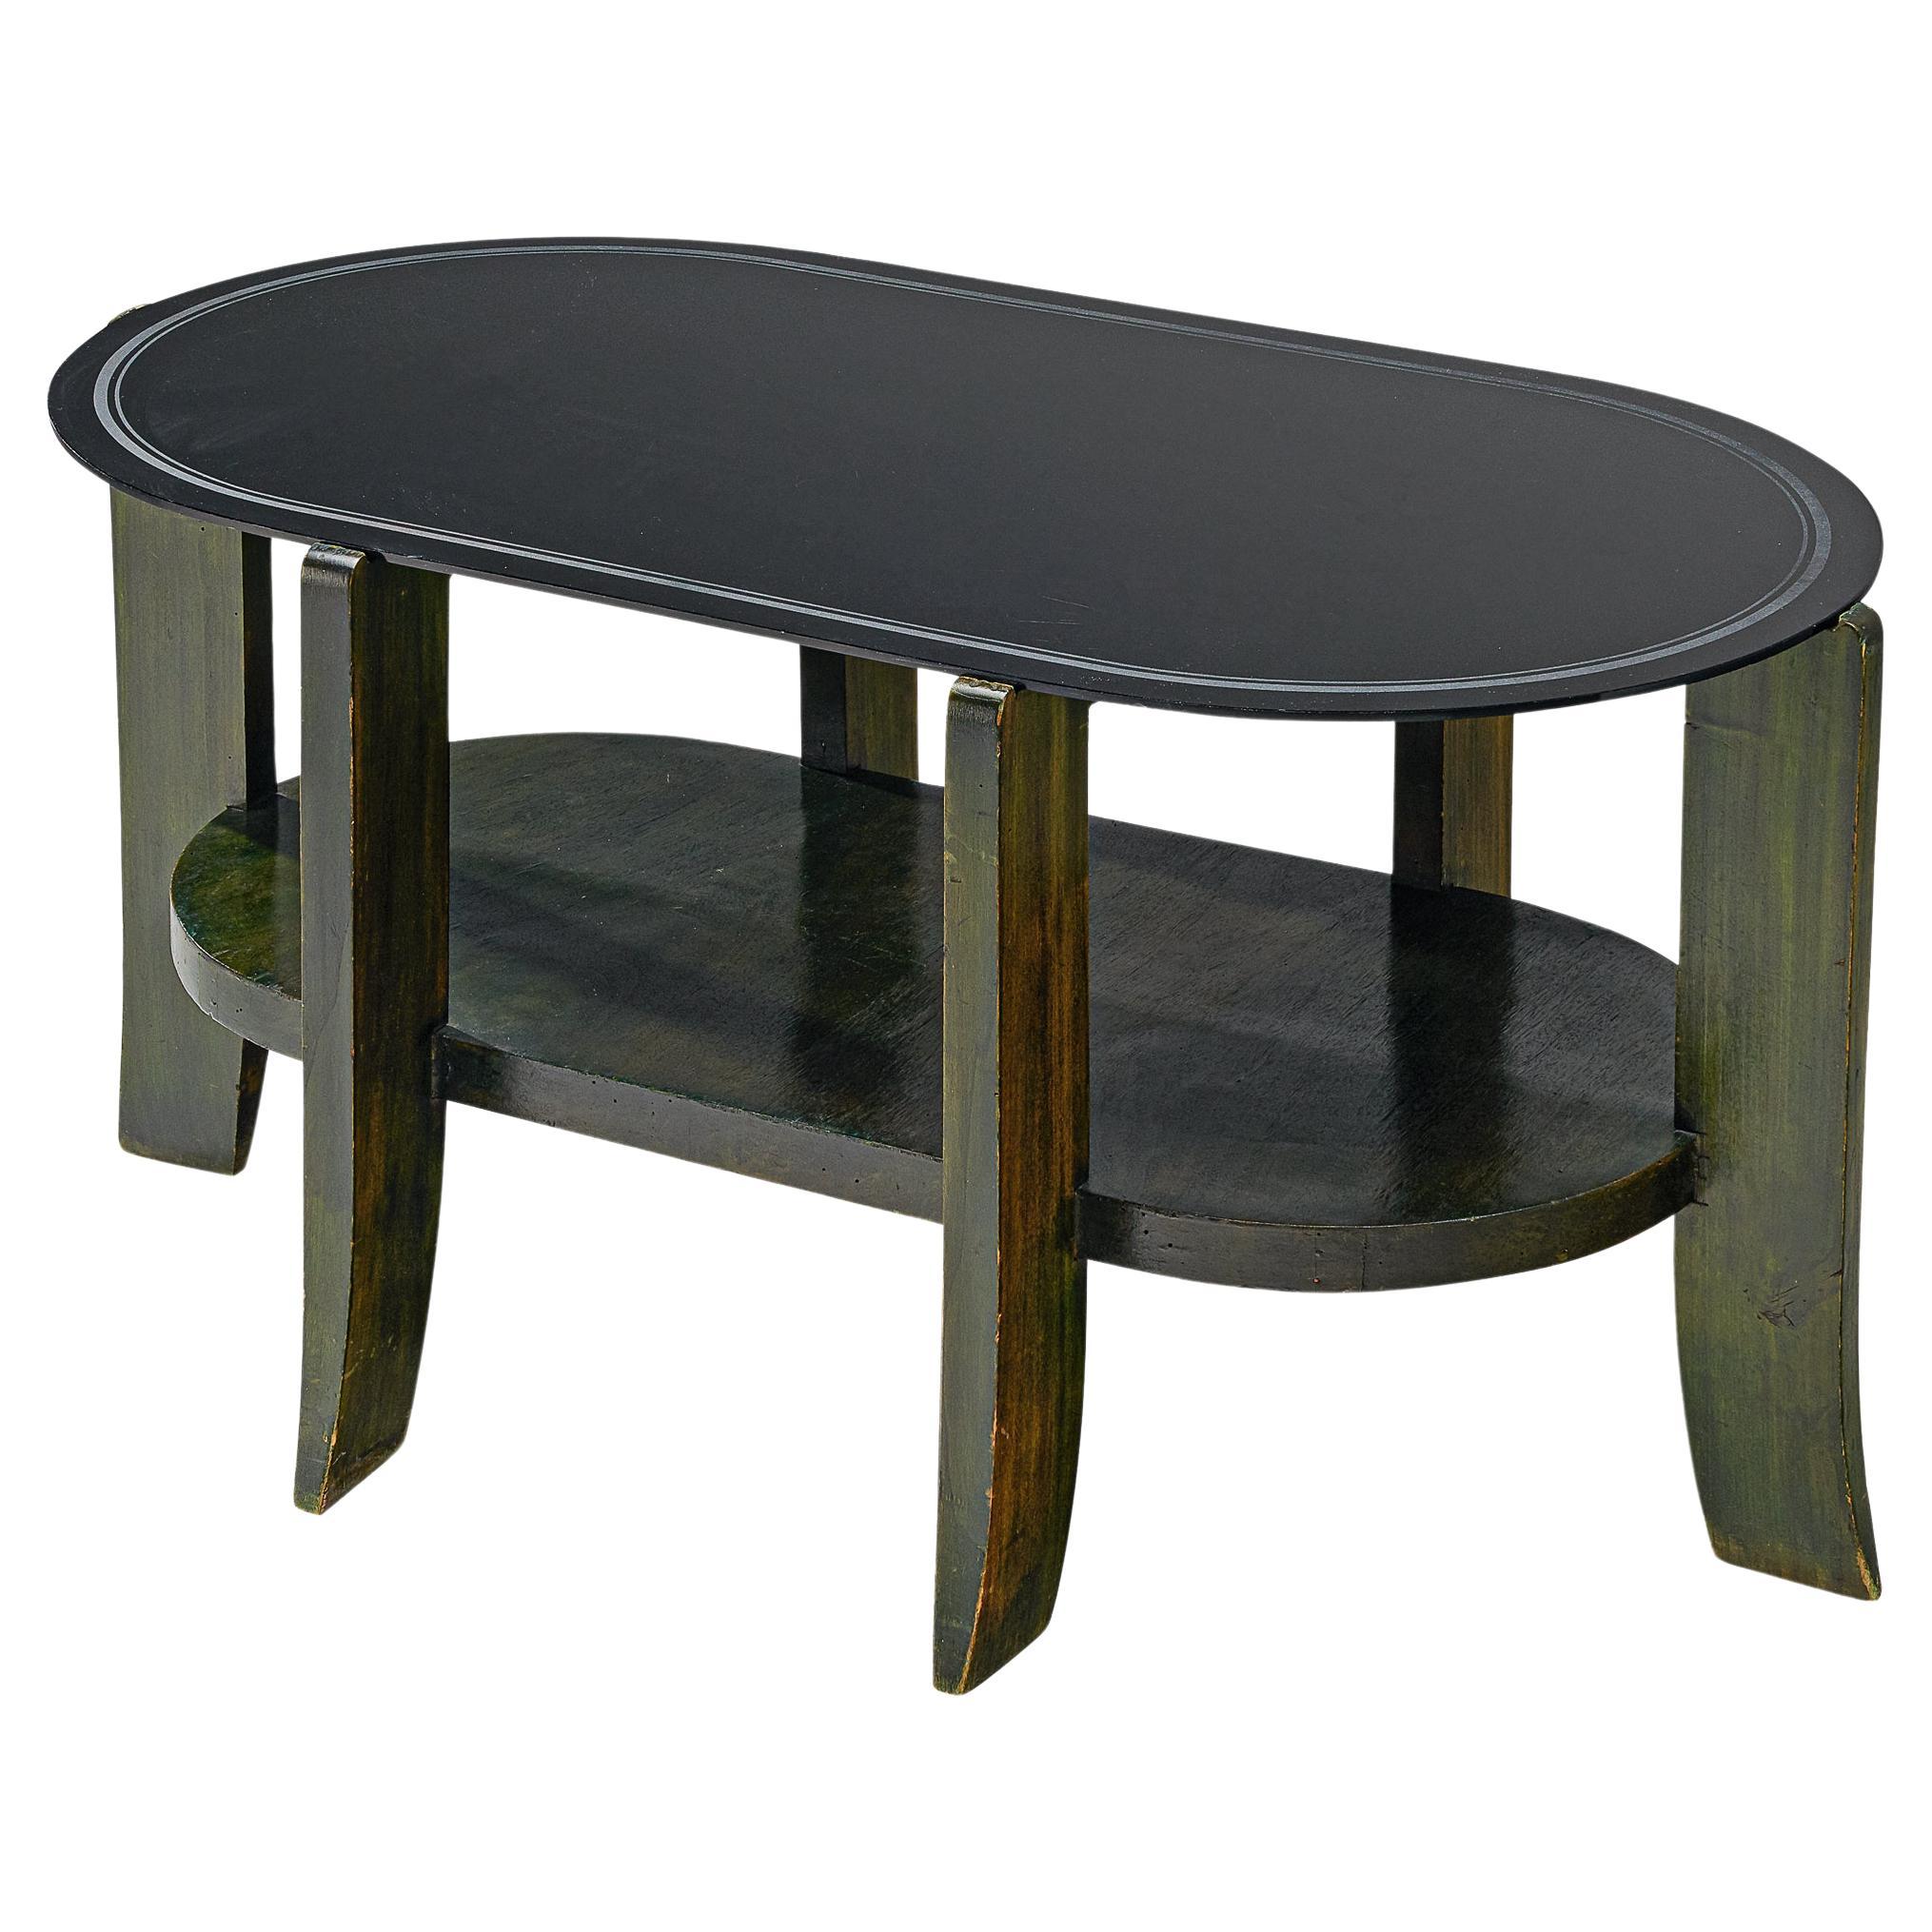 Italian Art Deco Oval Shaped Coffee Table in Green Stained Wood  For Sale